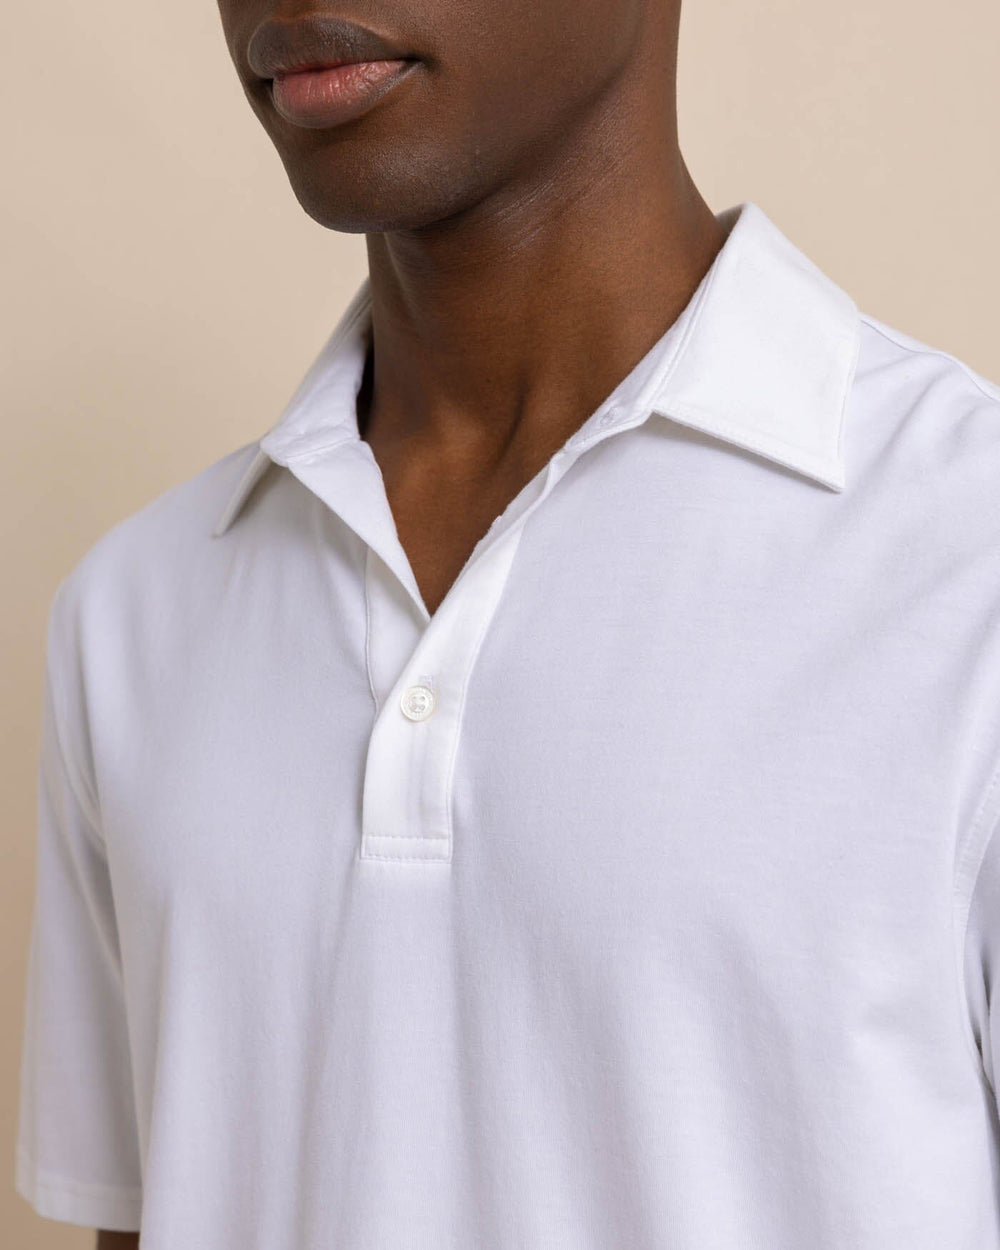 The detail view of the Southern Tide The Seaport Polo by Southern Tide - Classic White